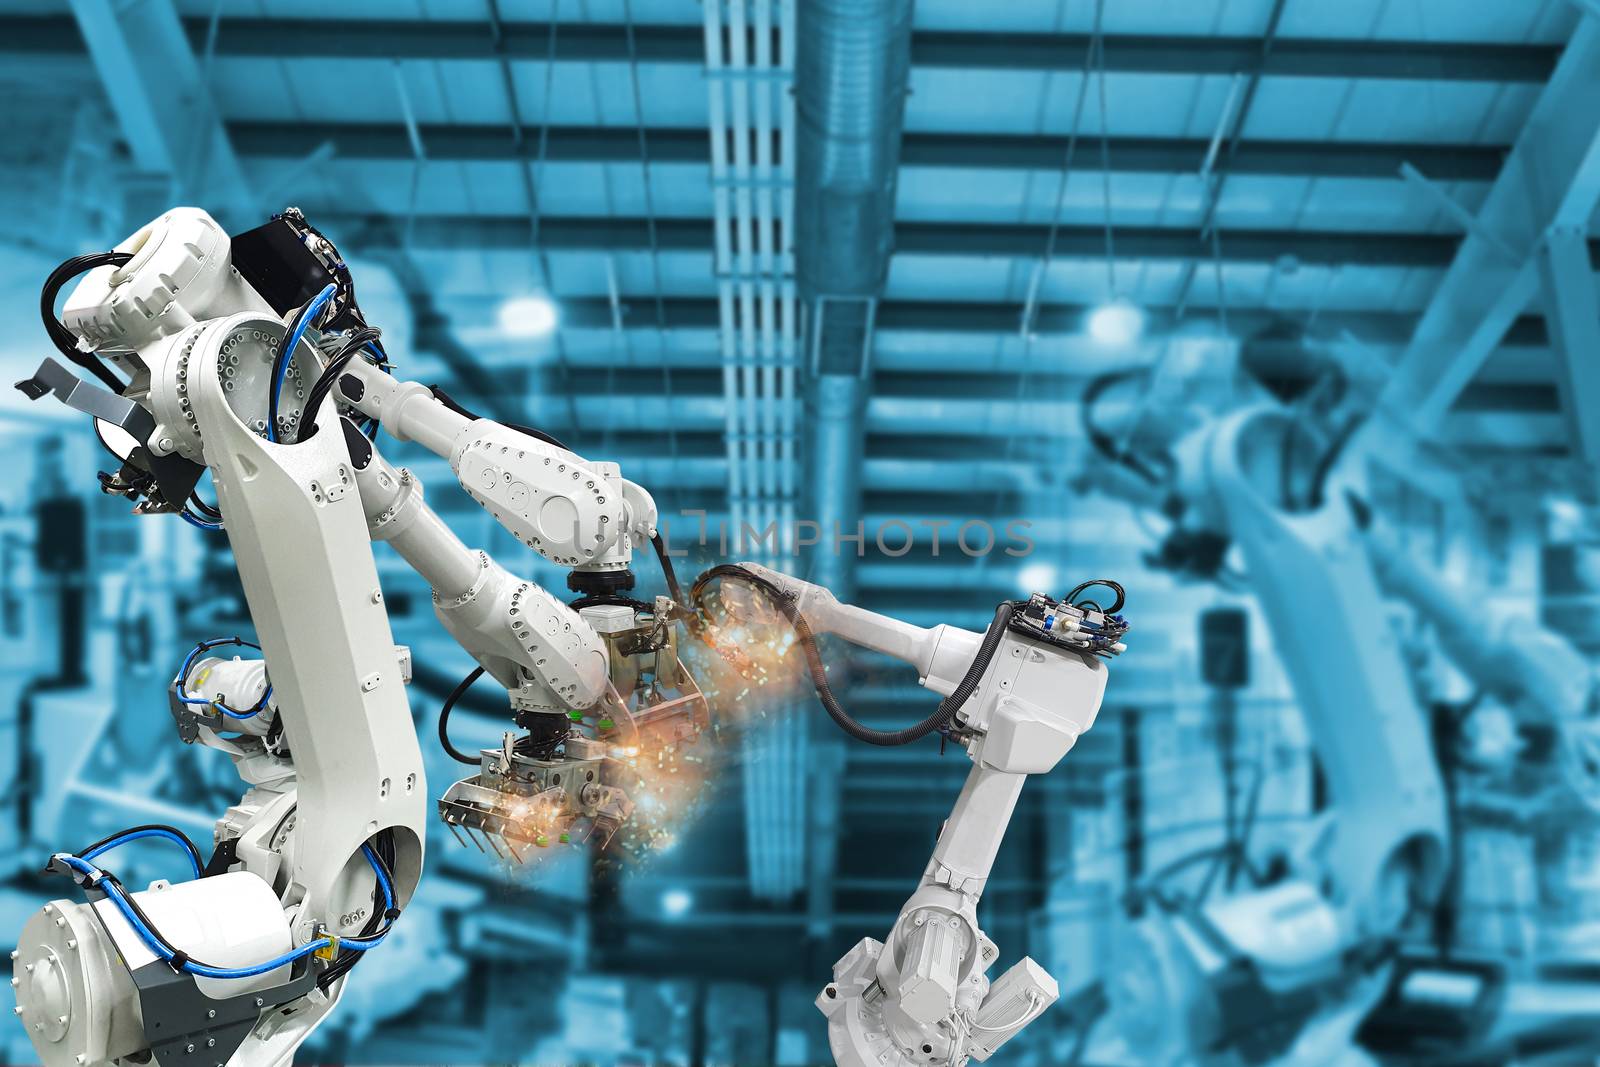 Robotic arms, industrial robots, factory automation machines by sompongtom